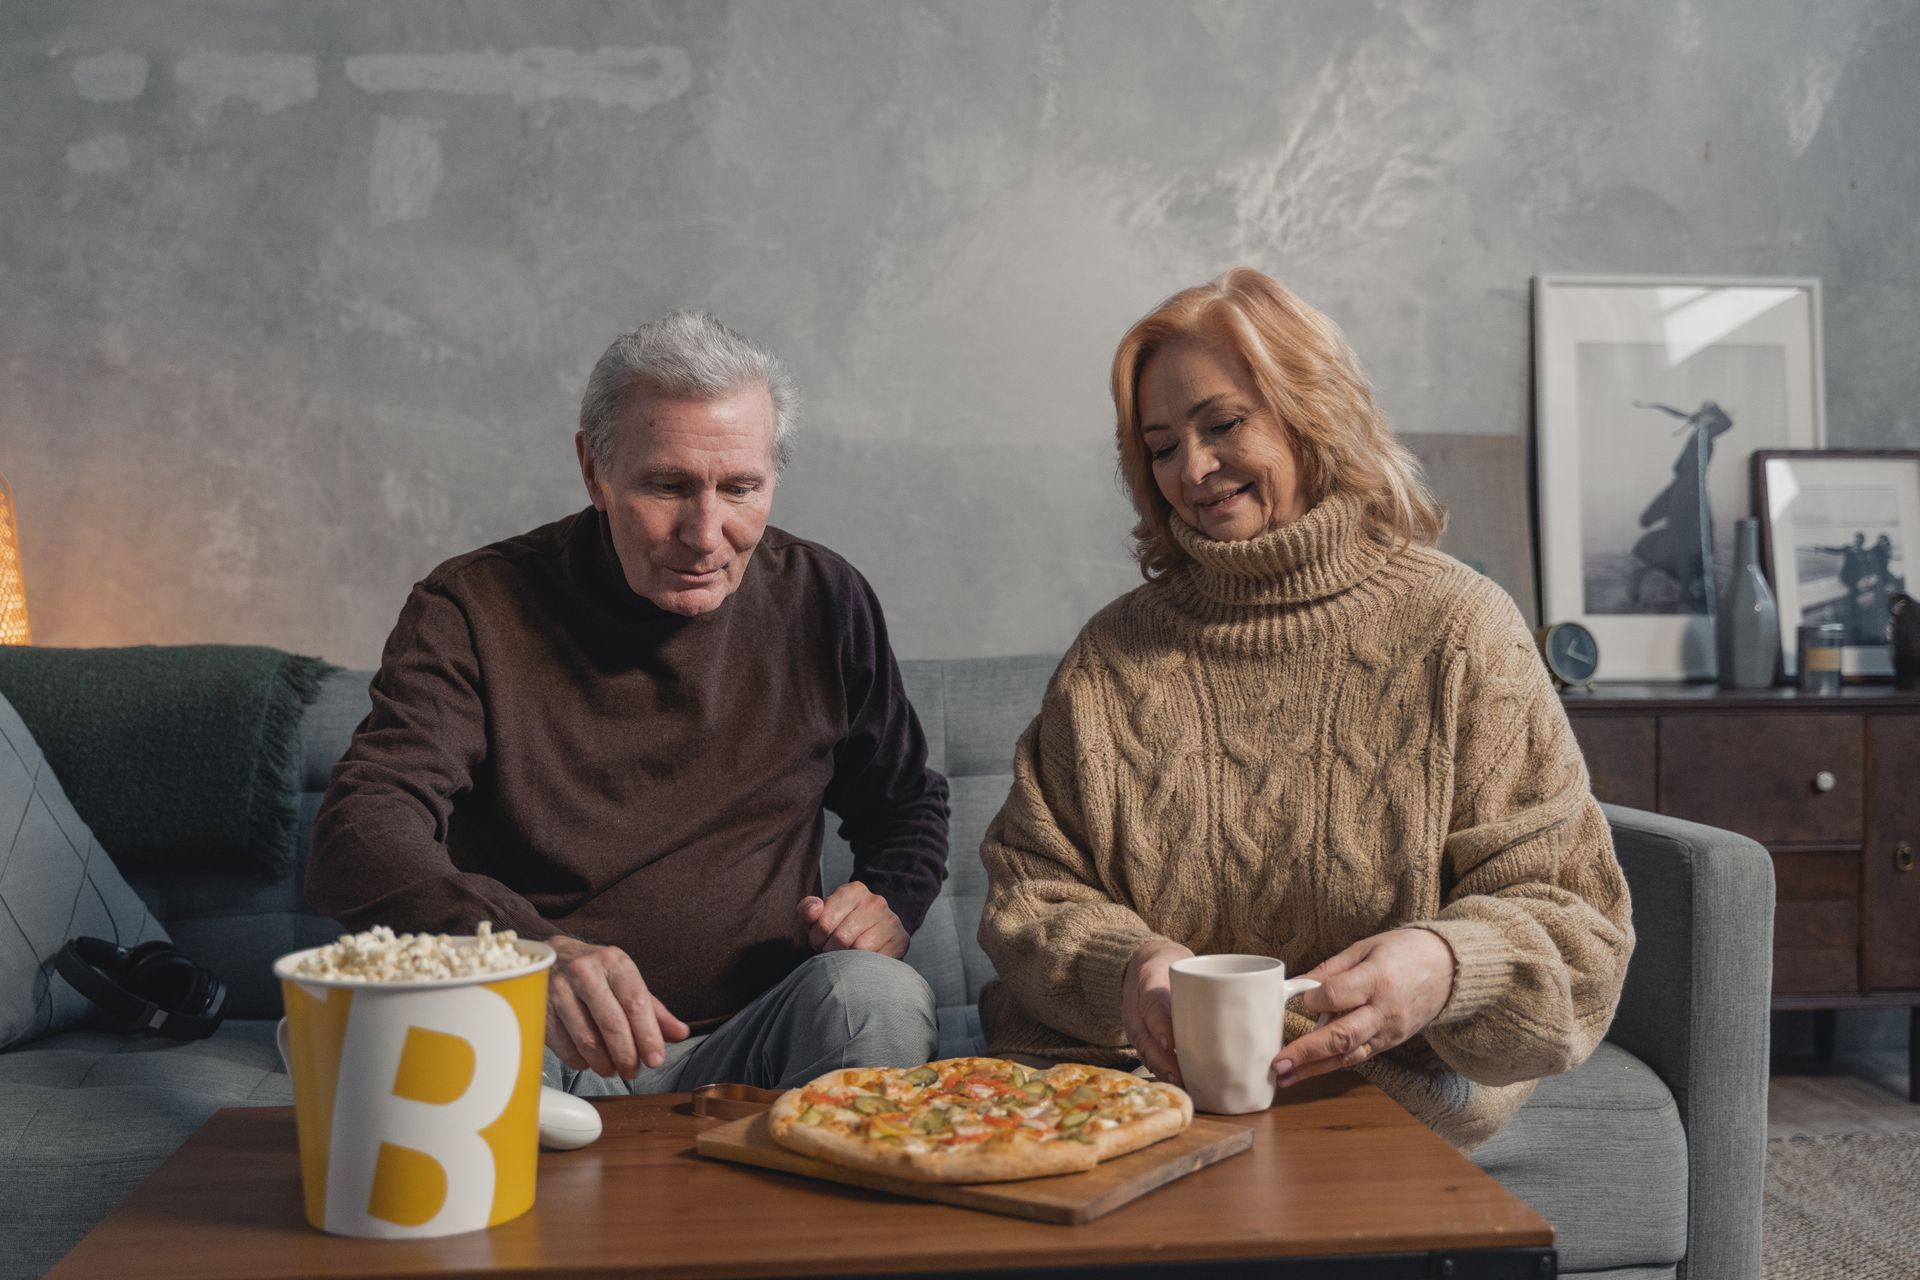 A couple are sitting on their couch looking at a pizza and box of popcorn on their coffee table. They are both wearing earth-toned sweaters.